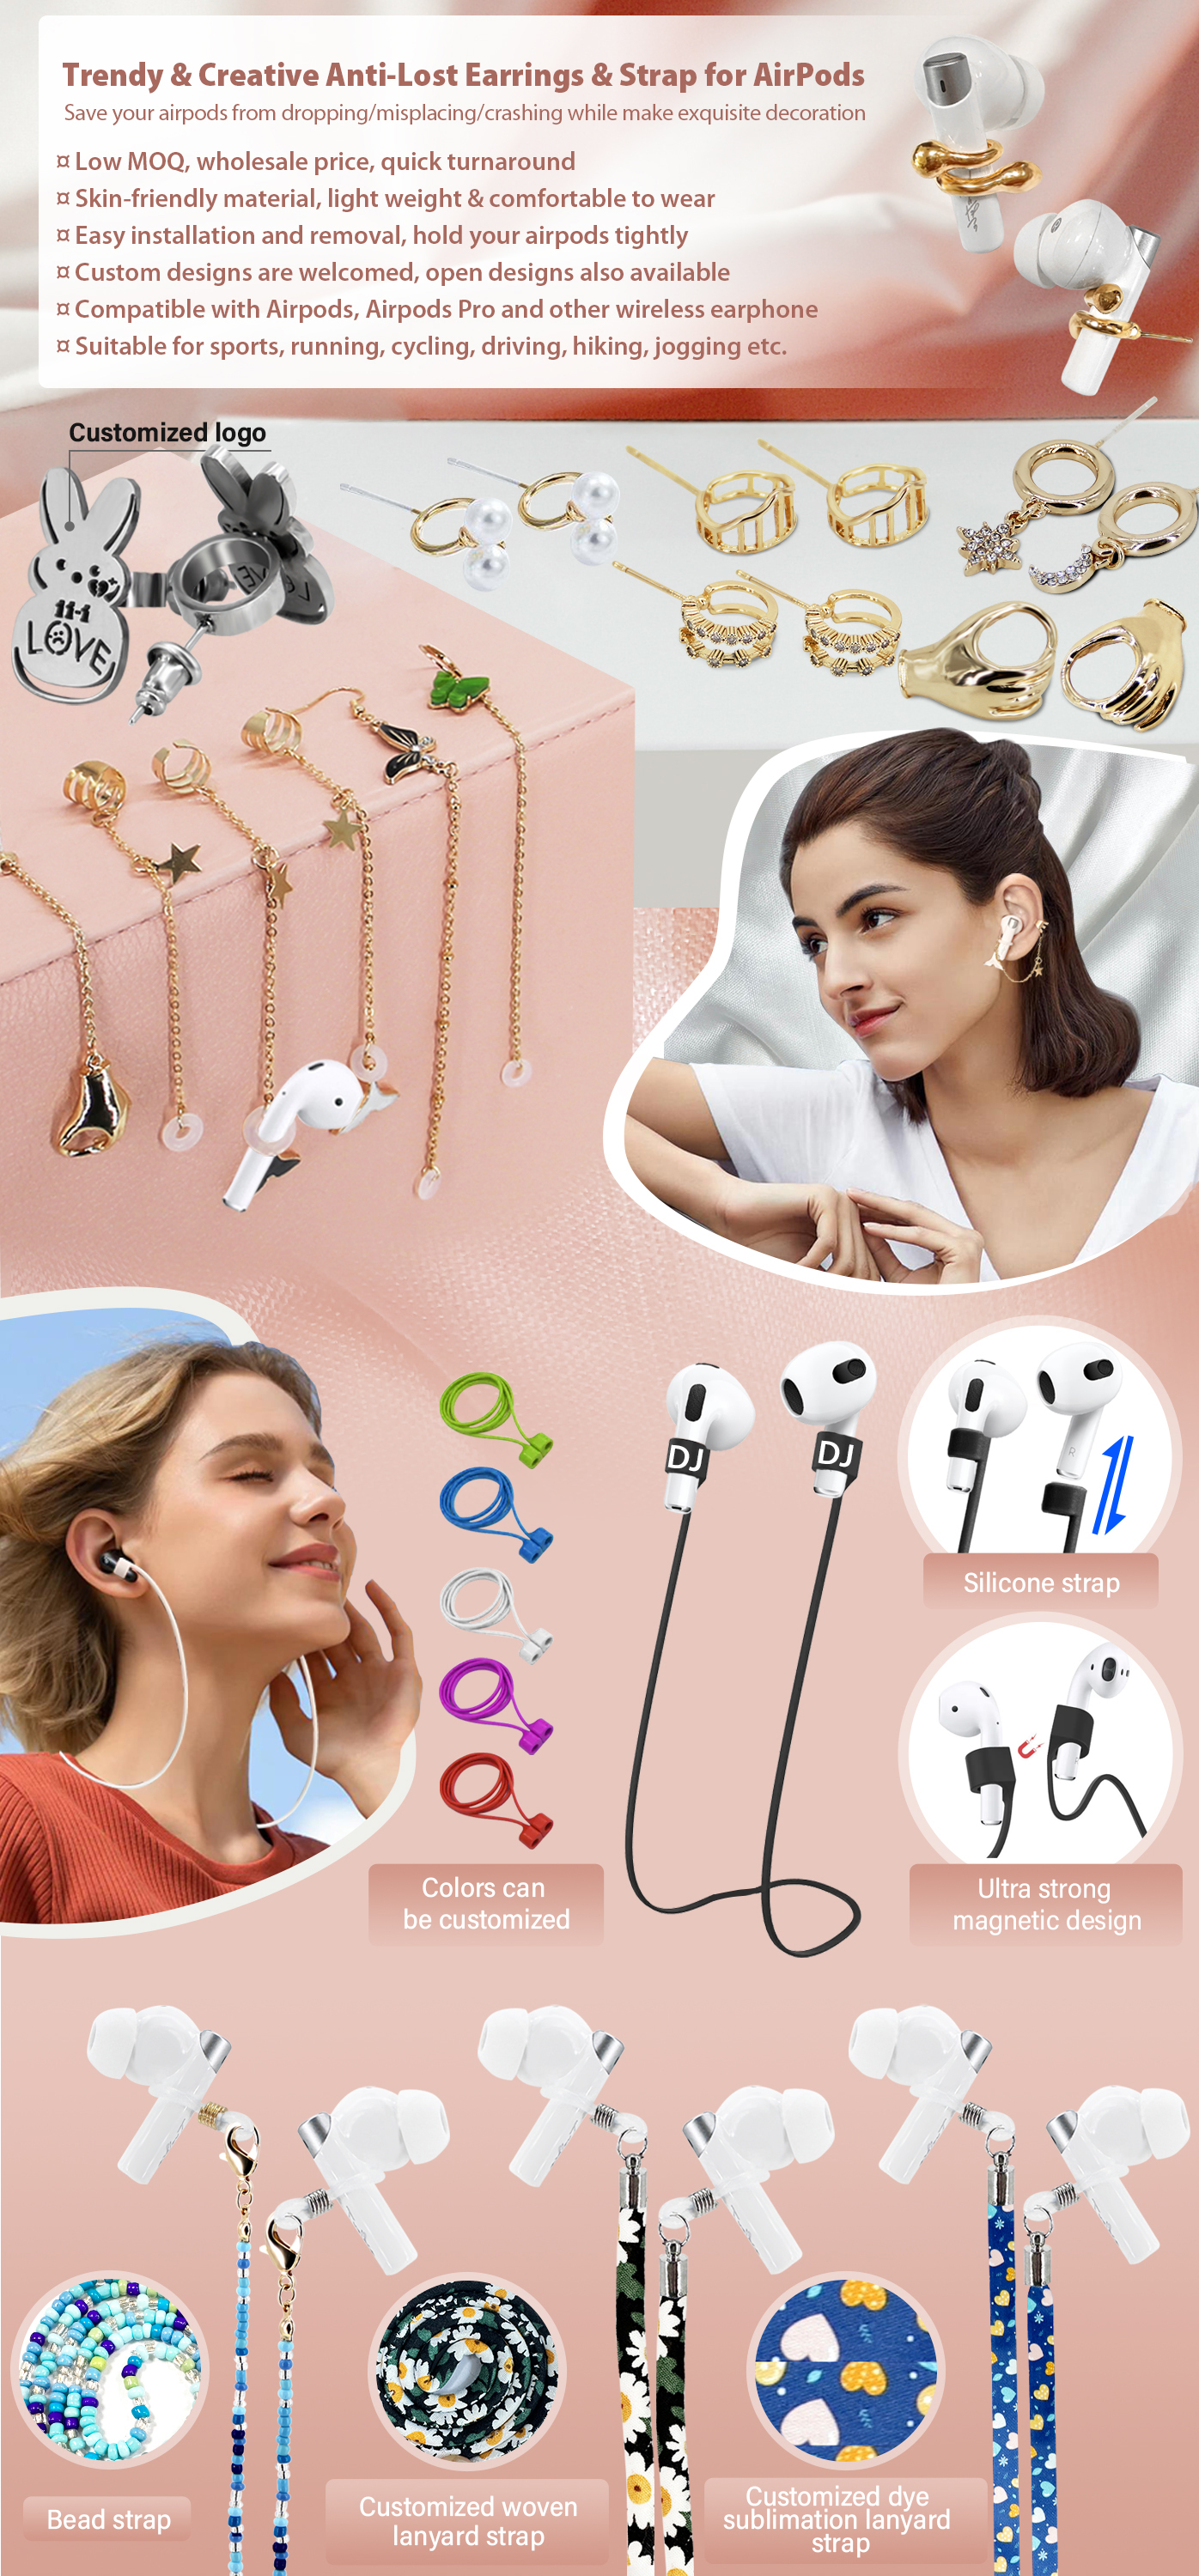 Trendy & Creative Anti-Lost Earrings & Strap for AirPods